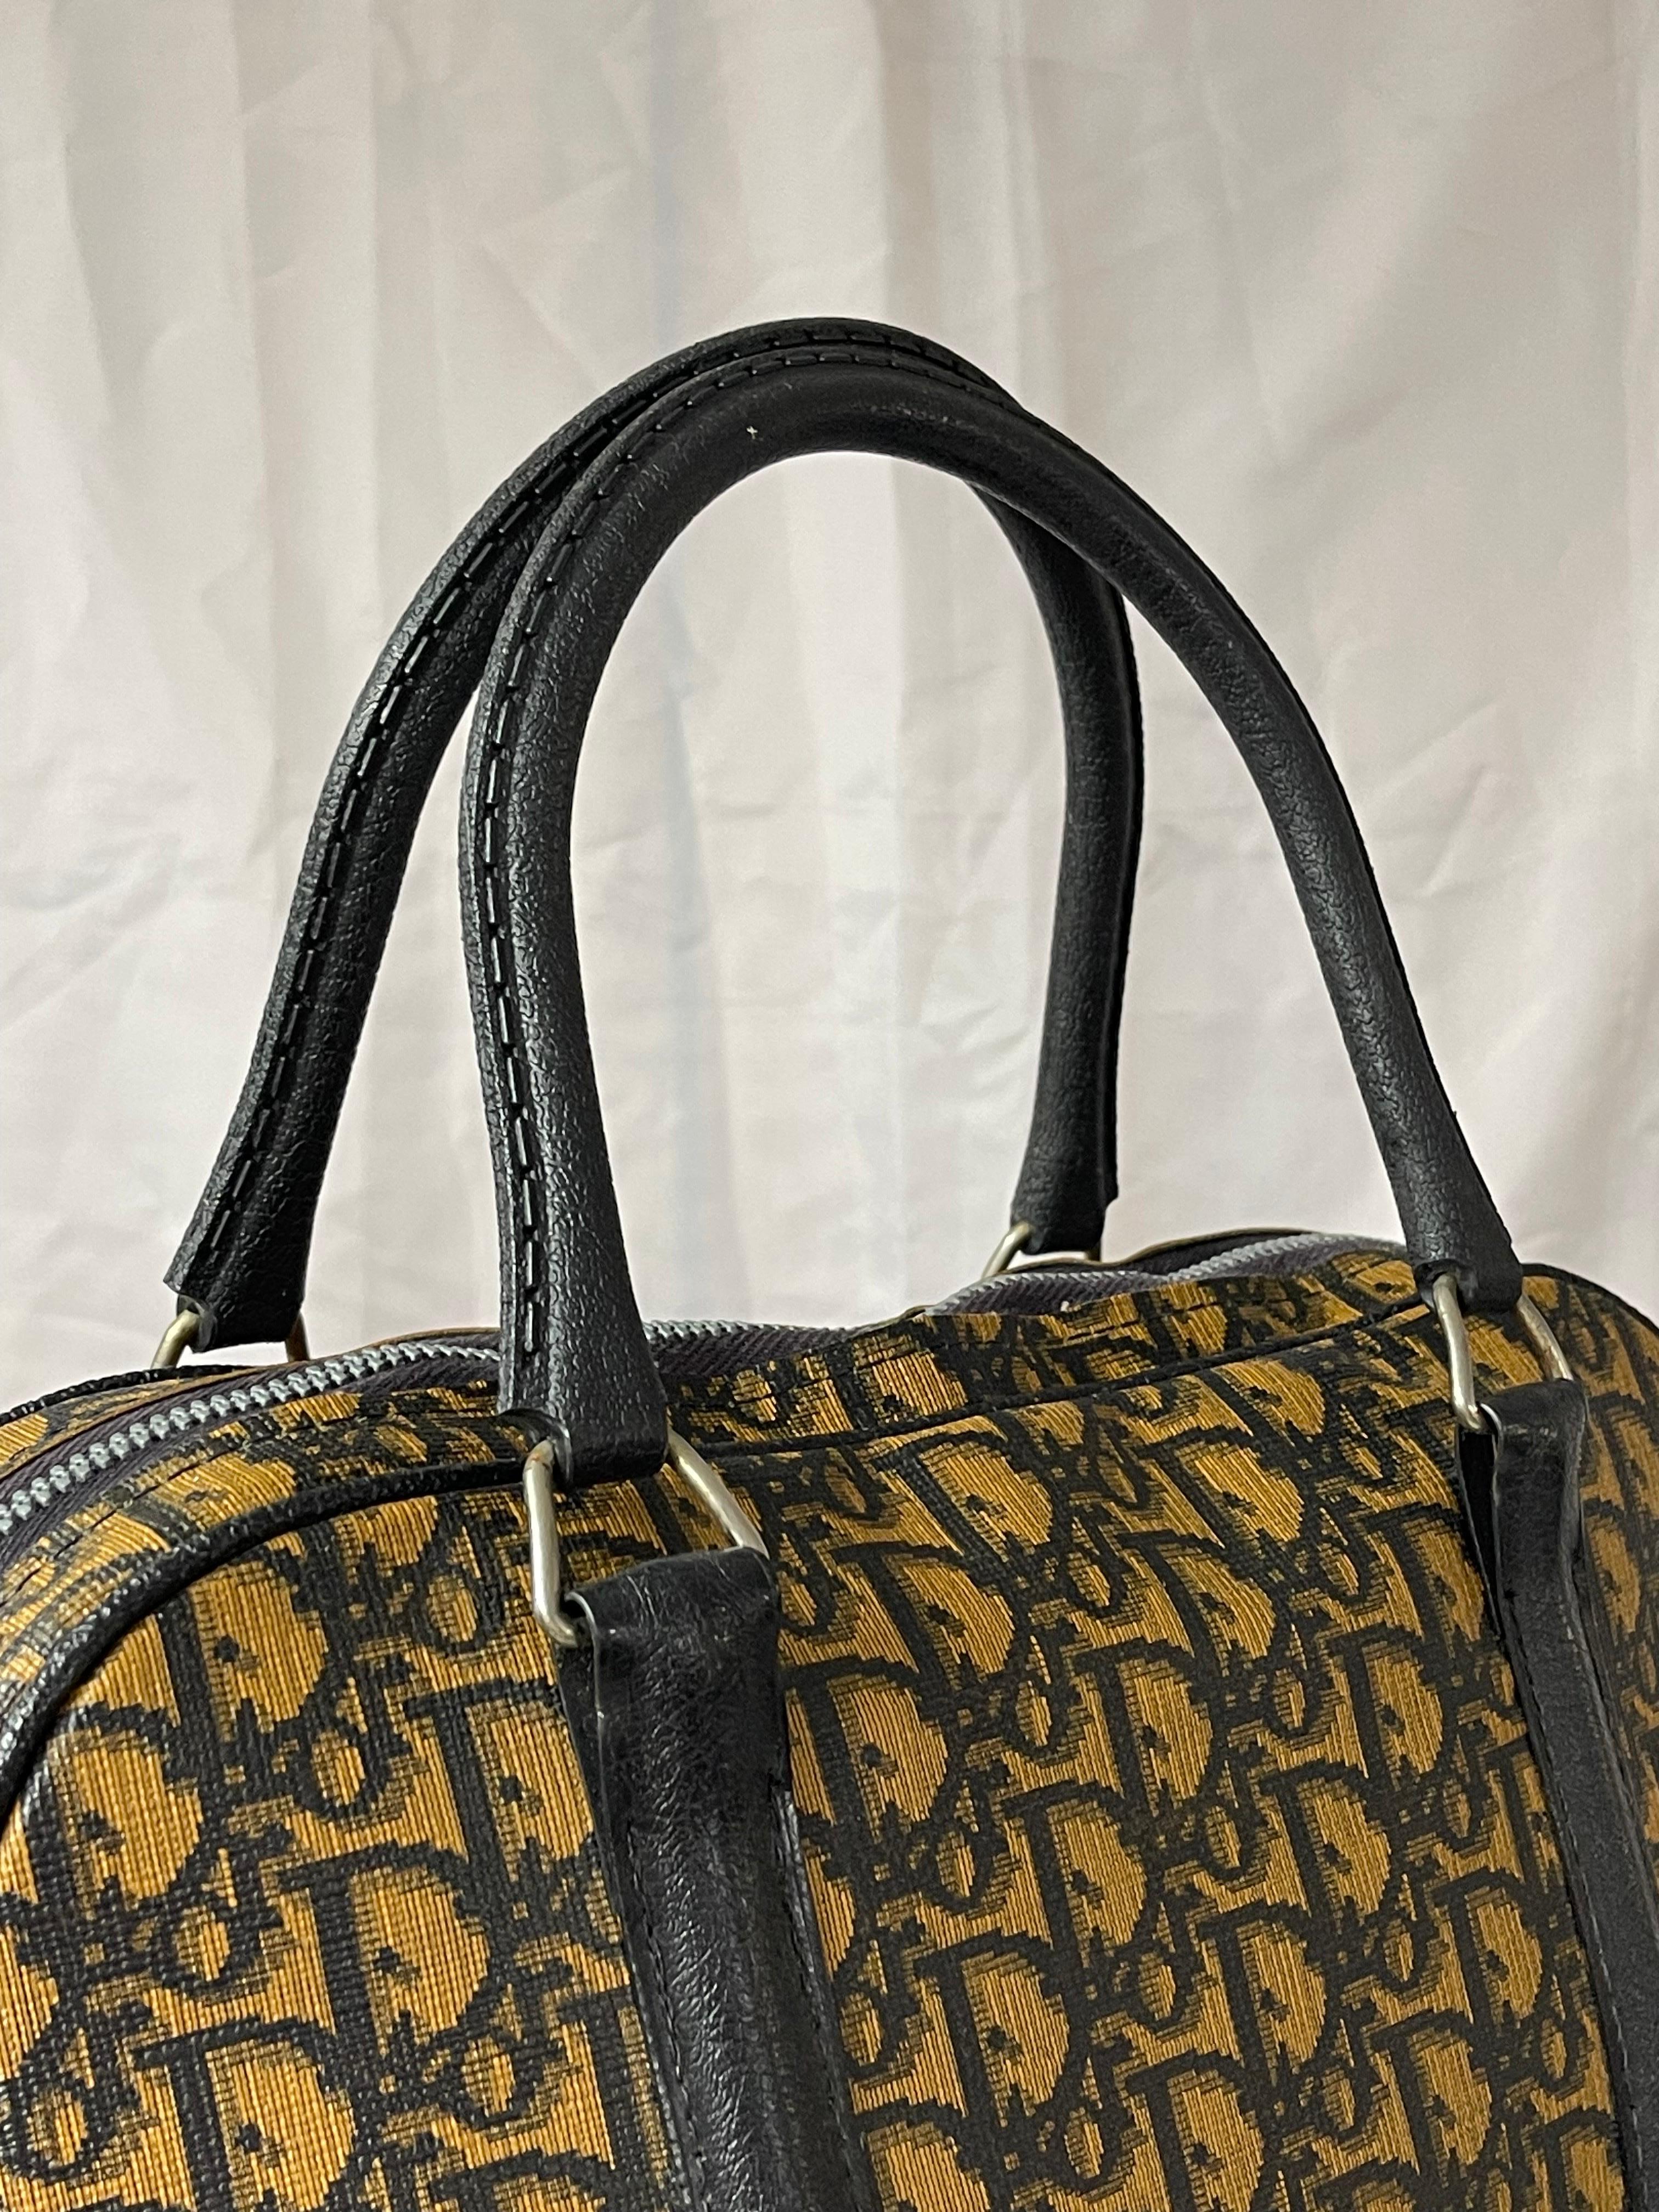 Rare Early Vintage Christian Dior Monogrammed Bowling Bag For Sale 2